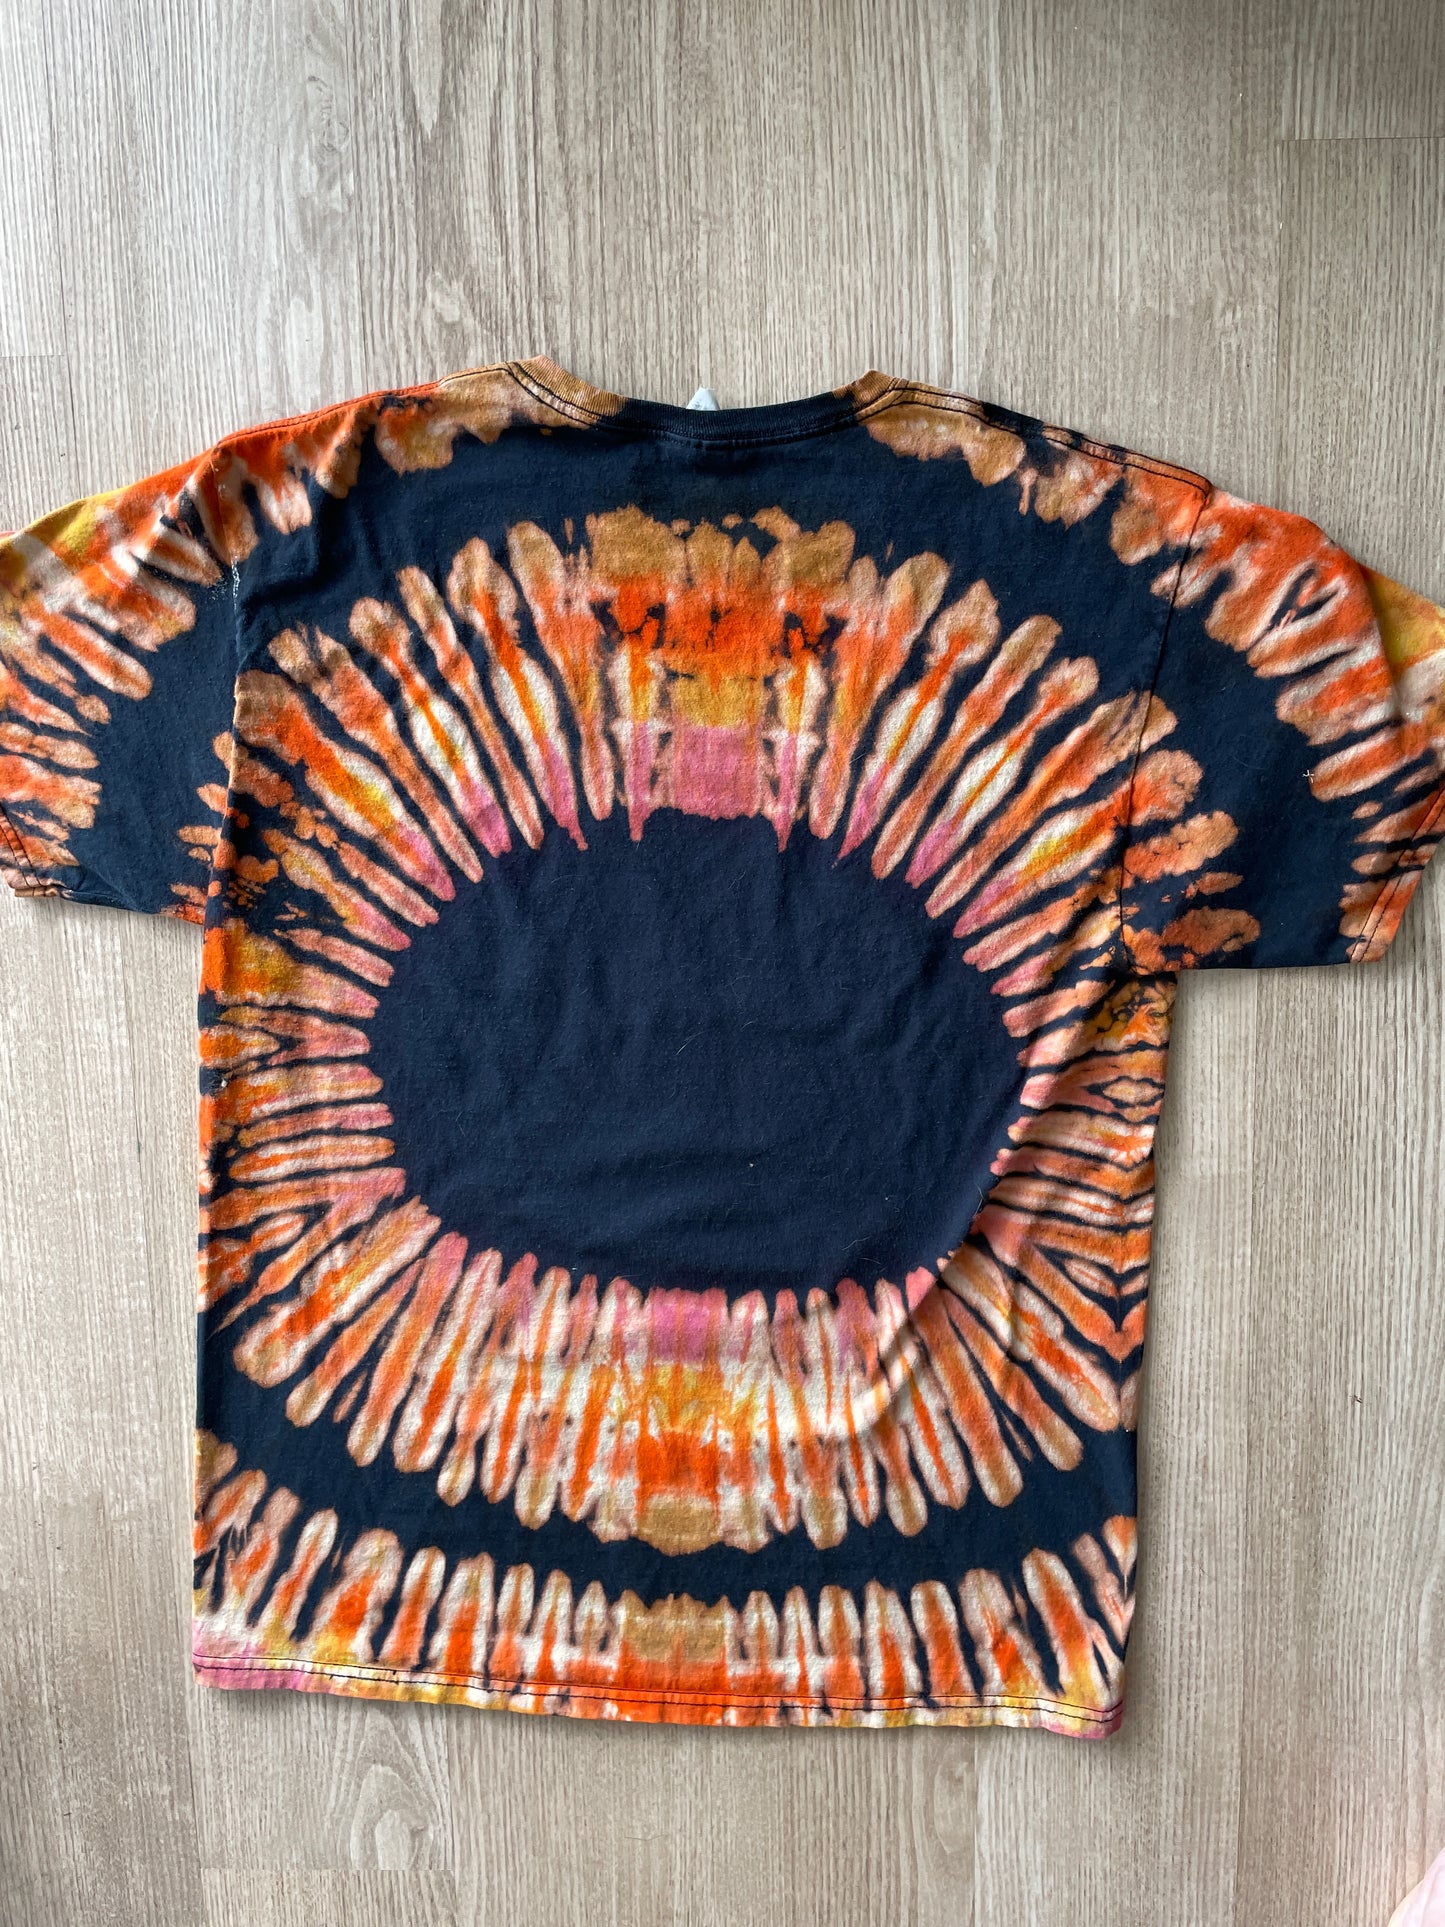 LARGE Men’s WTF Vert Der Ferk? Reverse Tie Dye Short Sleeve T-Shirt | One-Of-a-Kind Upcycled Black and Orange Pleated Top